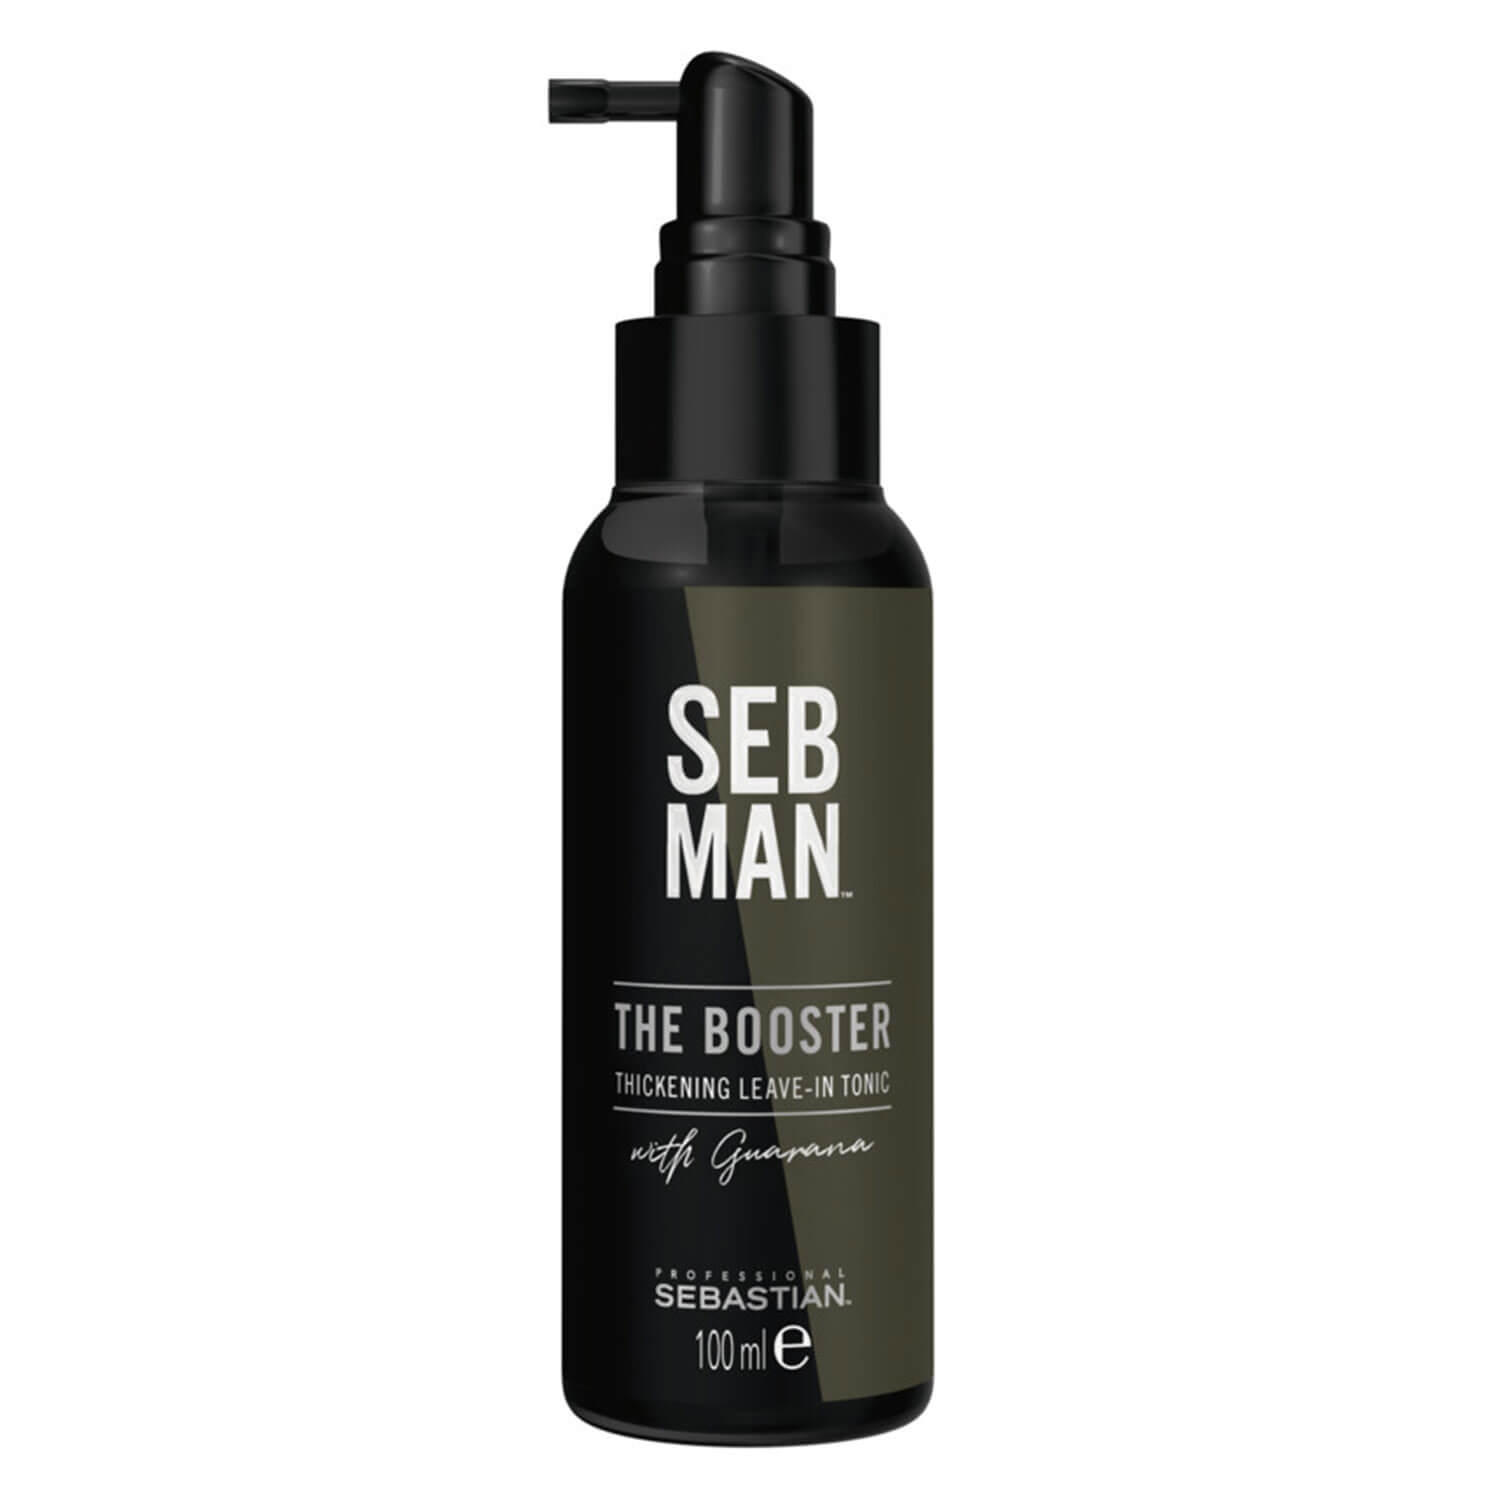 Product image from SEB MAN - The Booster Thickening Leave-in Tonic